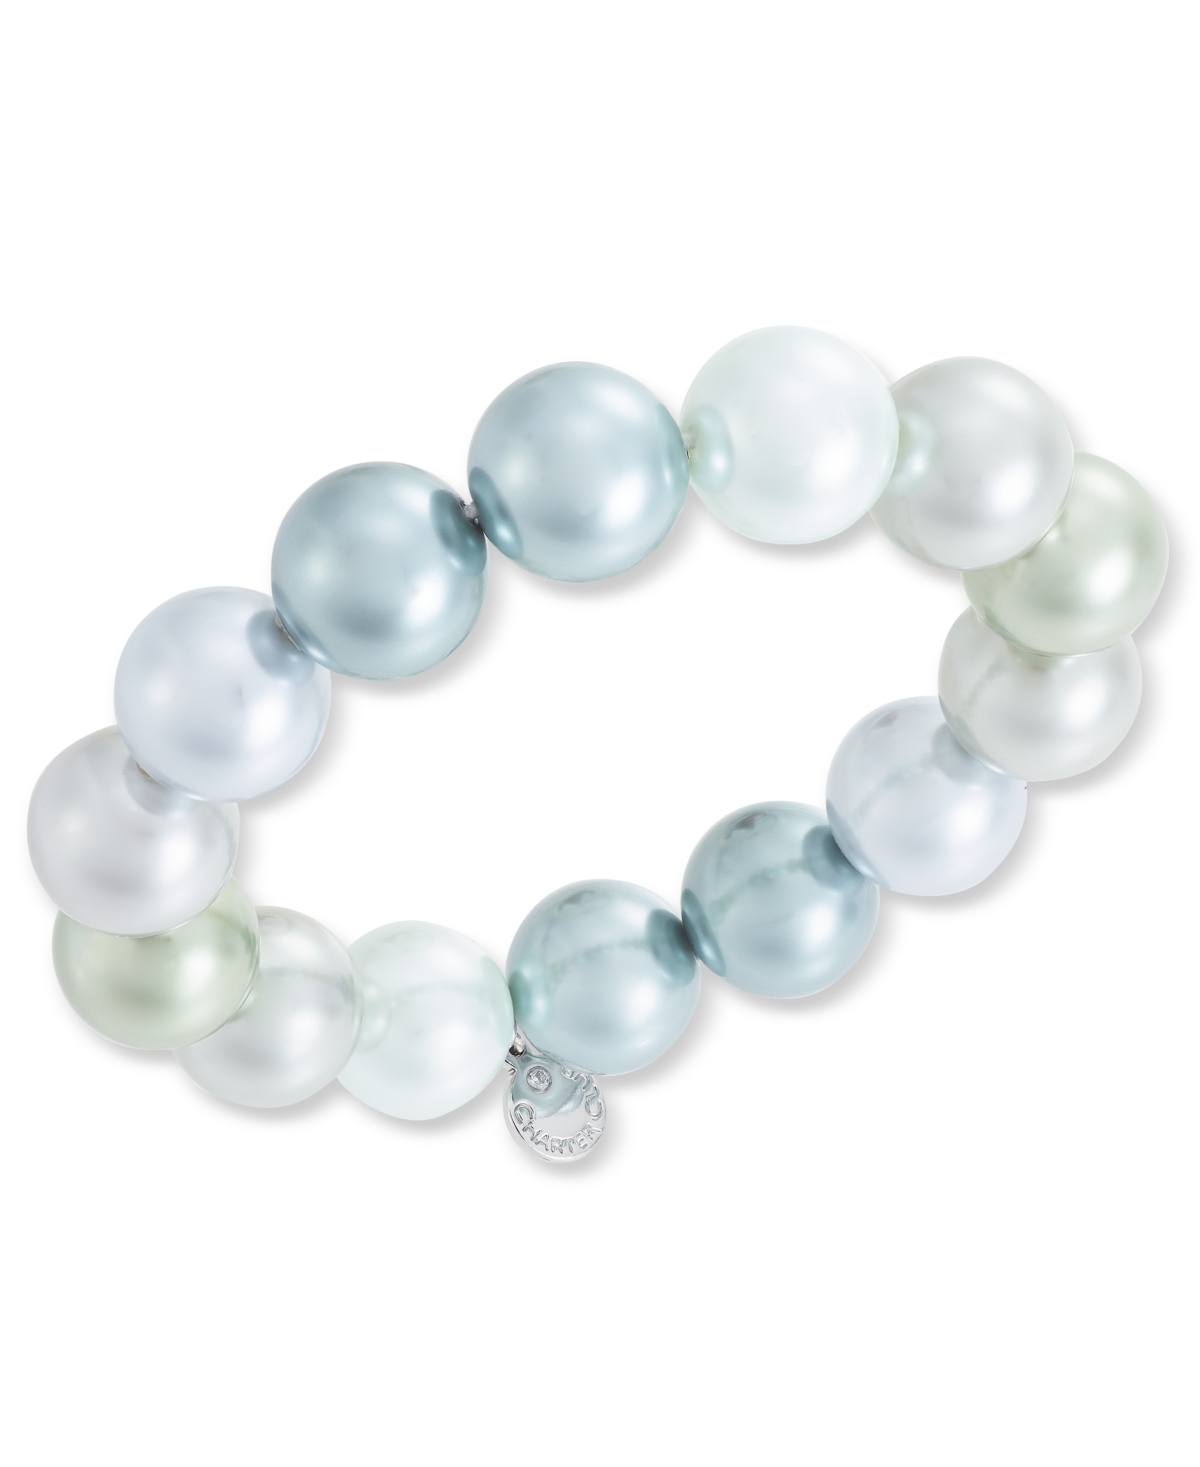 Silver-Tone Color Imitation Pearl Stretch Bracelet, Created for Macy's - Multi